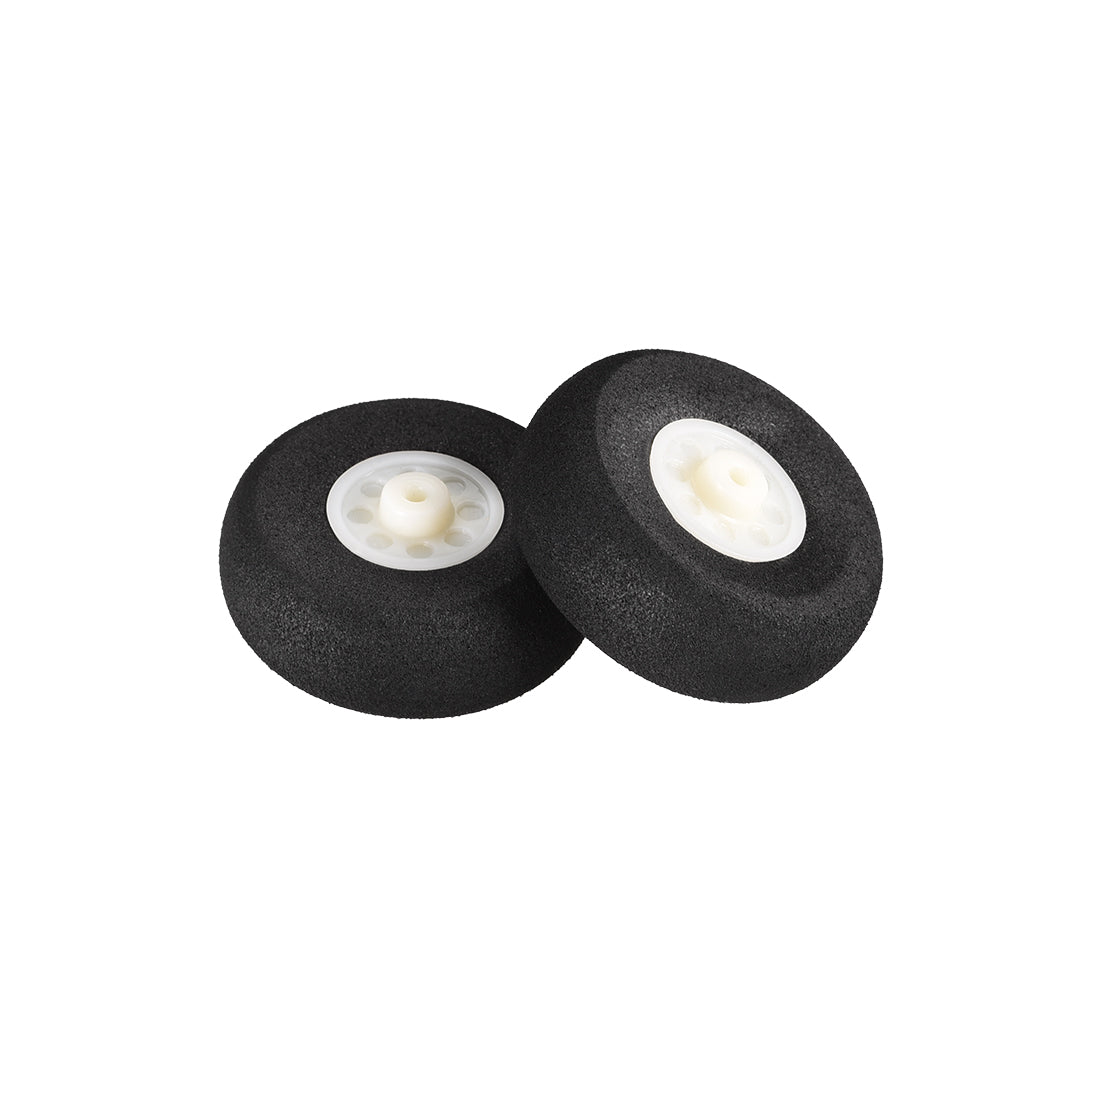 uxcell Uxcell RC Airplane Wheels - 2PCS RC Airplane Aircraft Sponge Wheels 1.5 inch x 0.08 inch